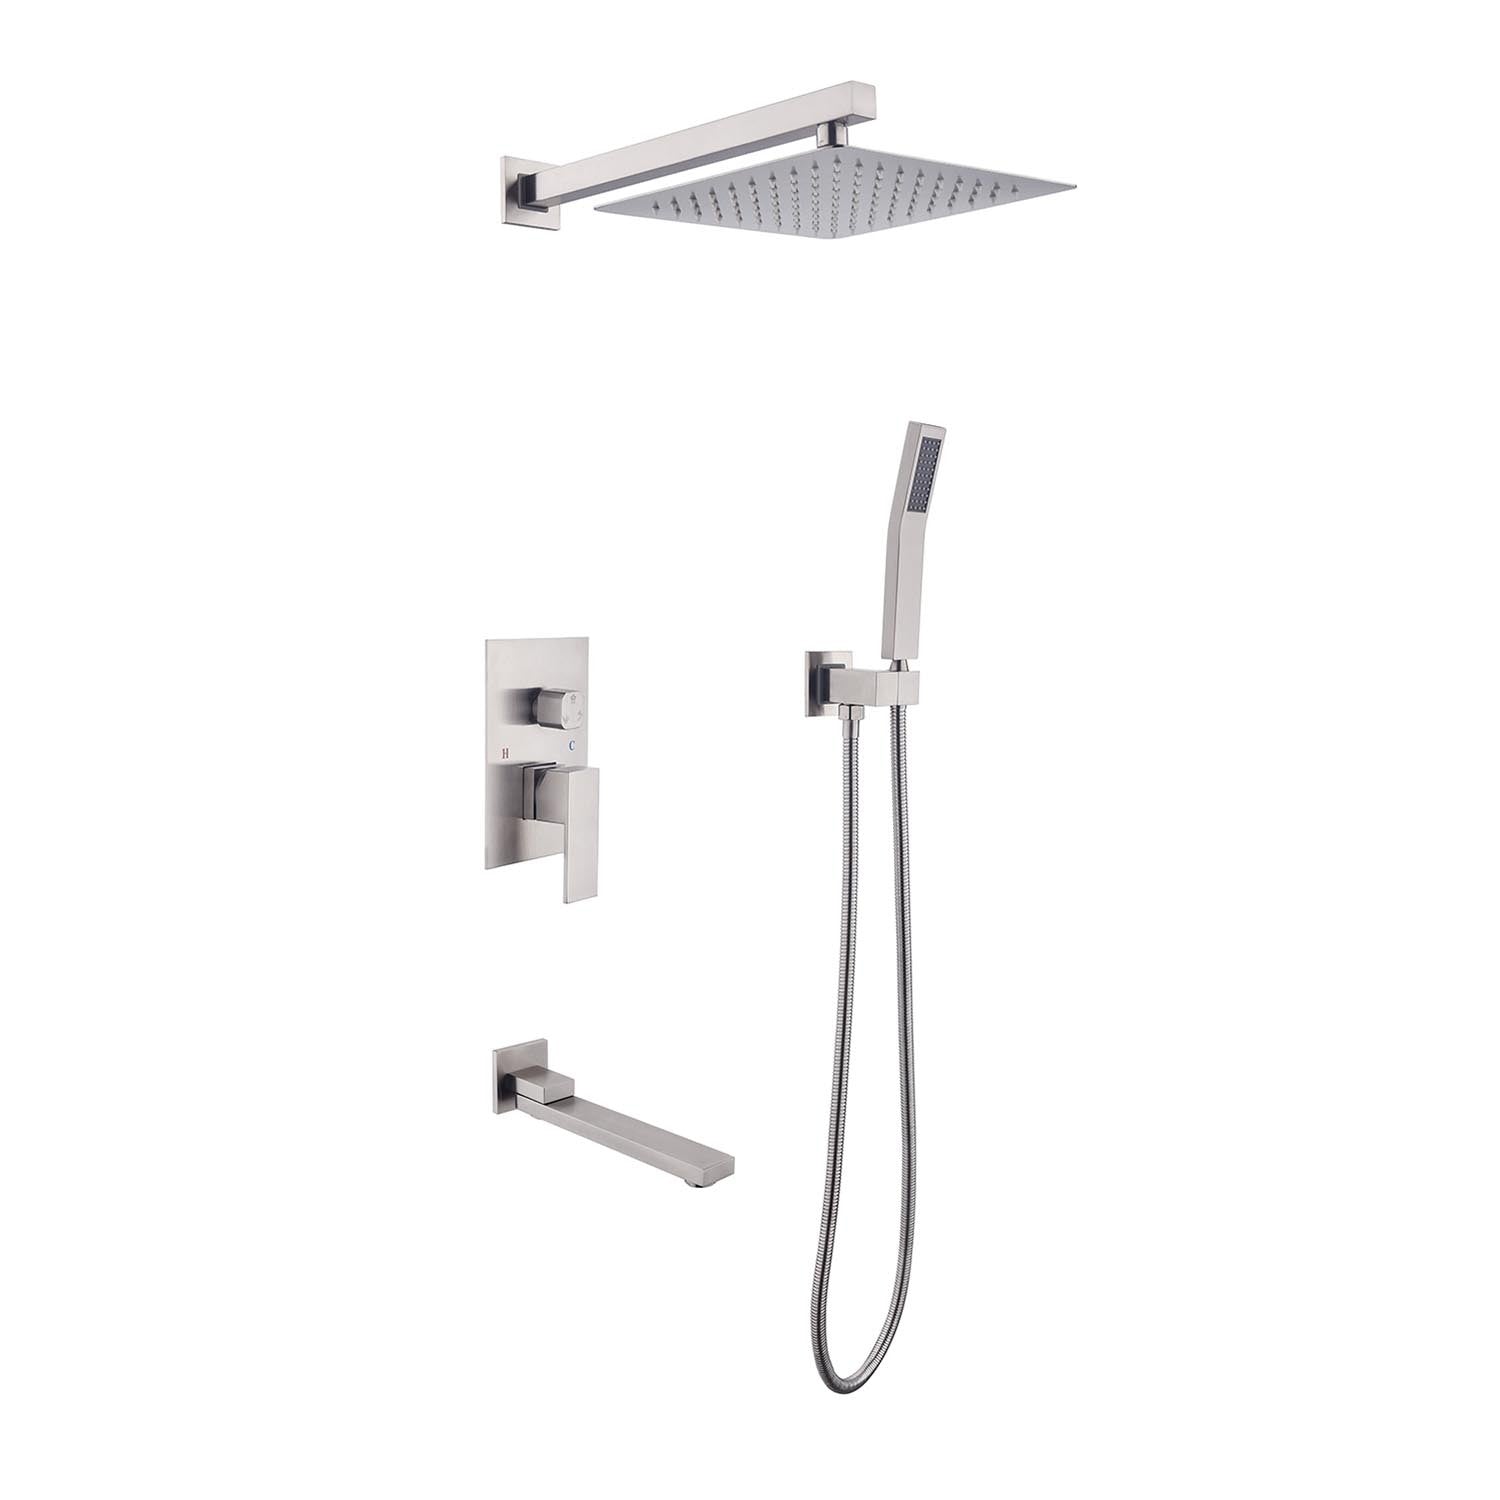 16" Rain Shower Head Systems Wall Mounted Shower